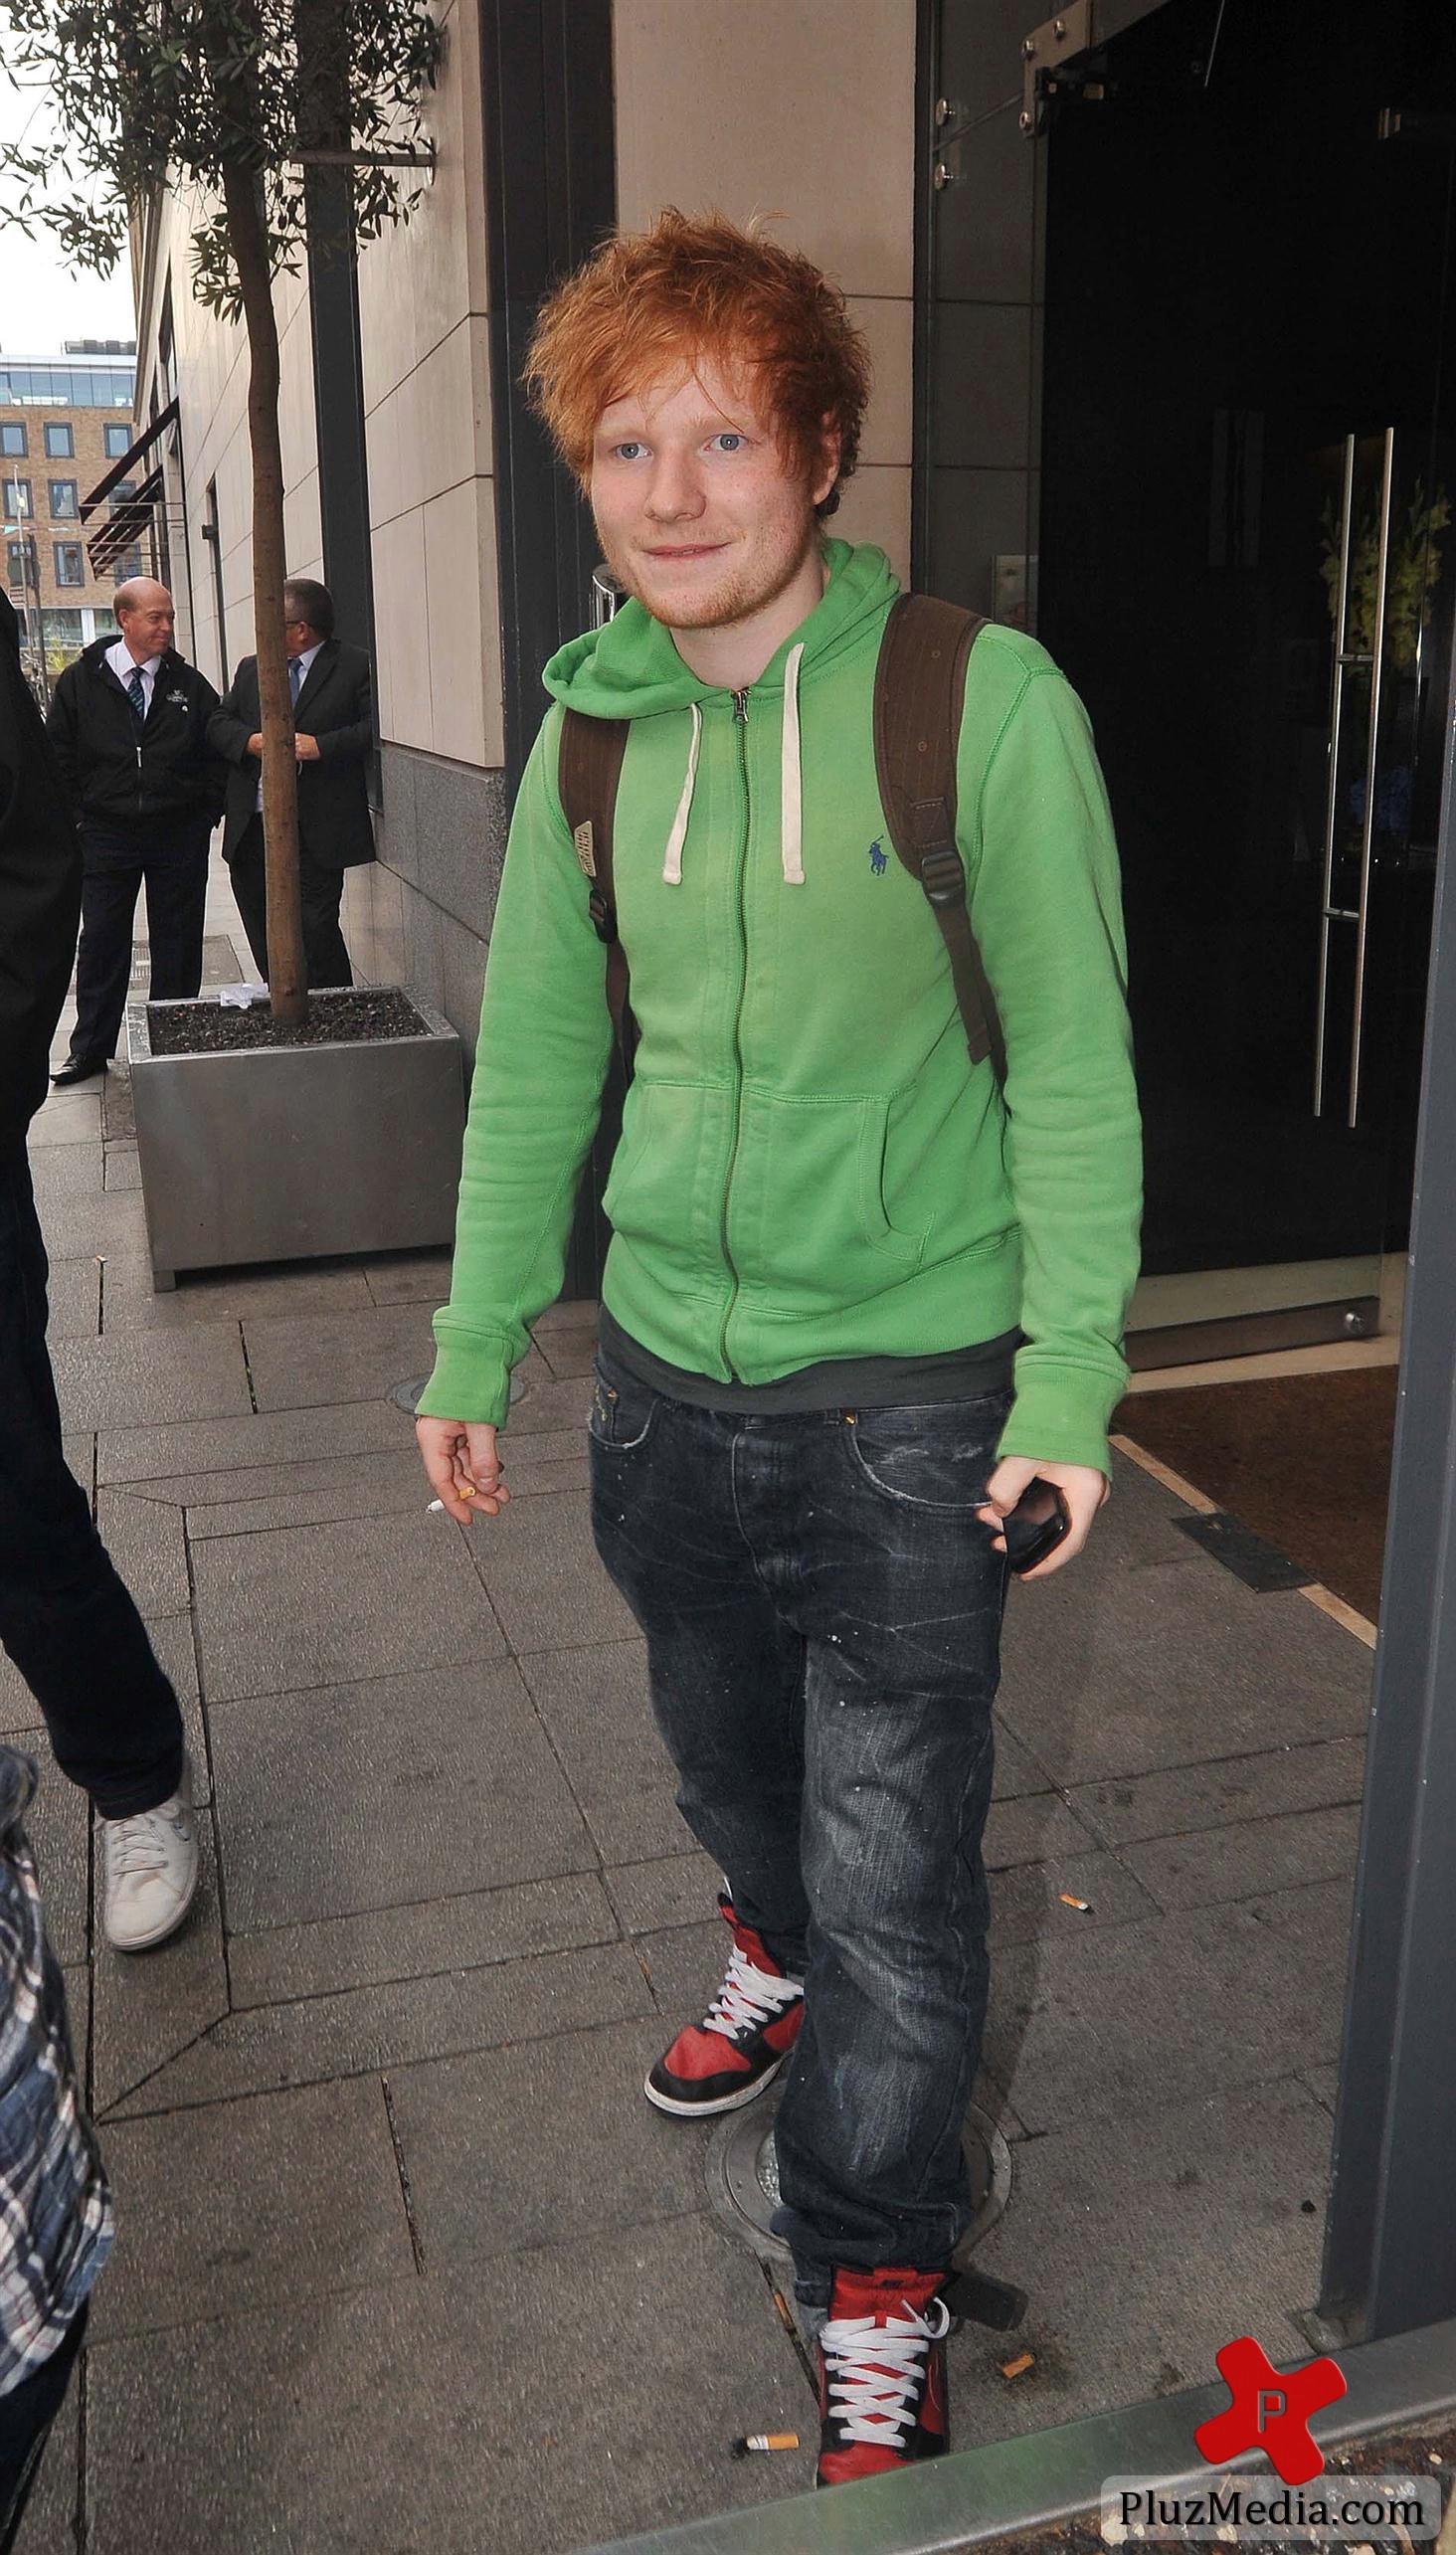 Ed Sheeran - Celebrities participating in Arthur's Day at St James's Gate  | Picture 84076